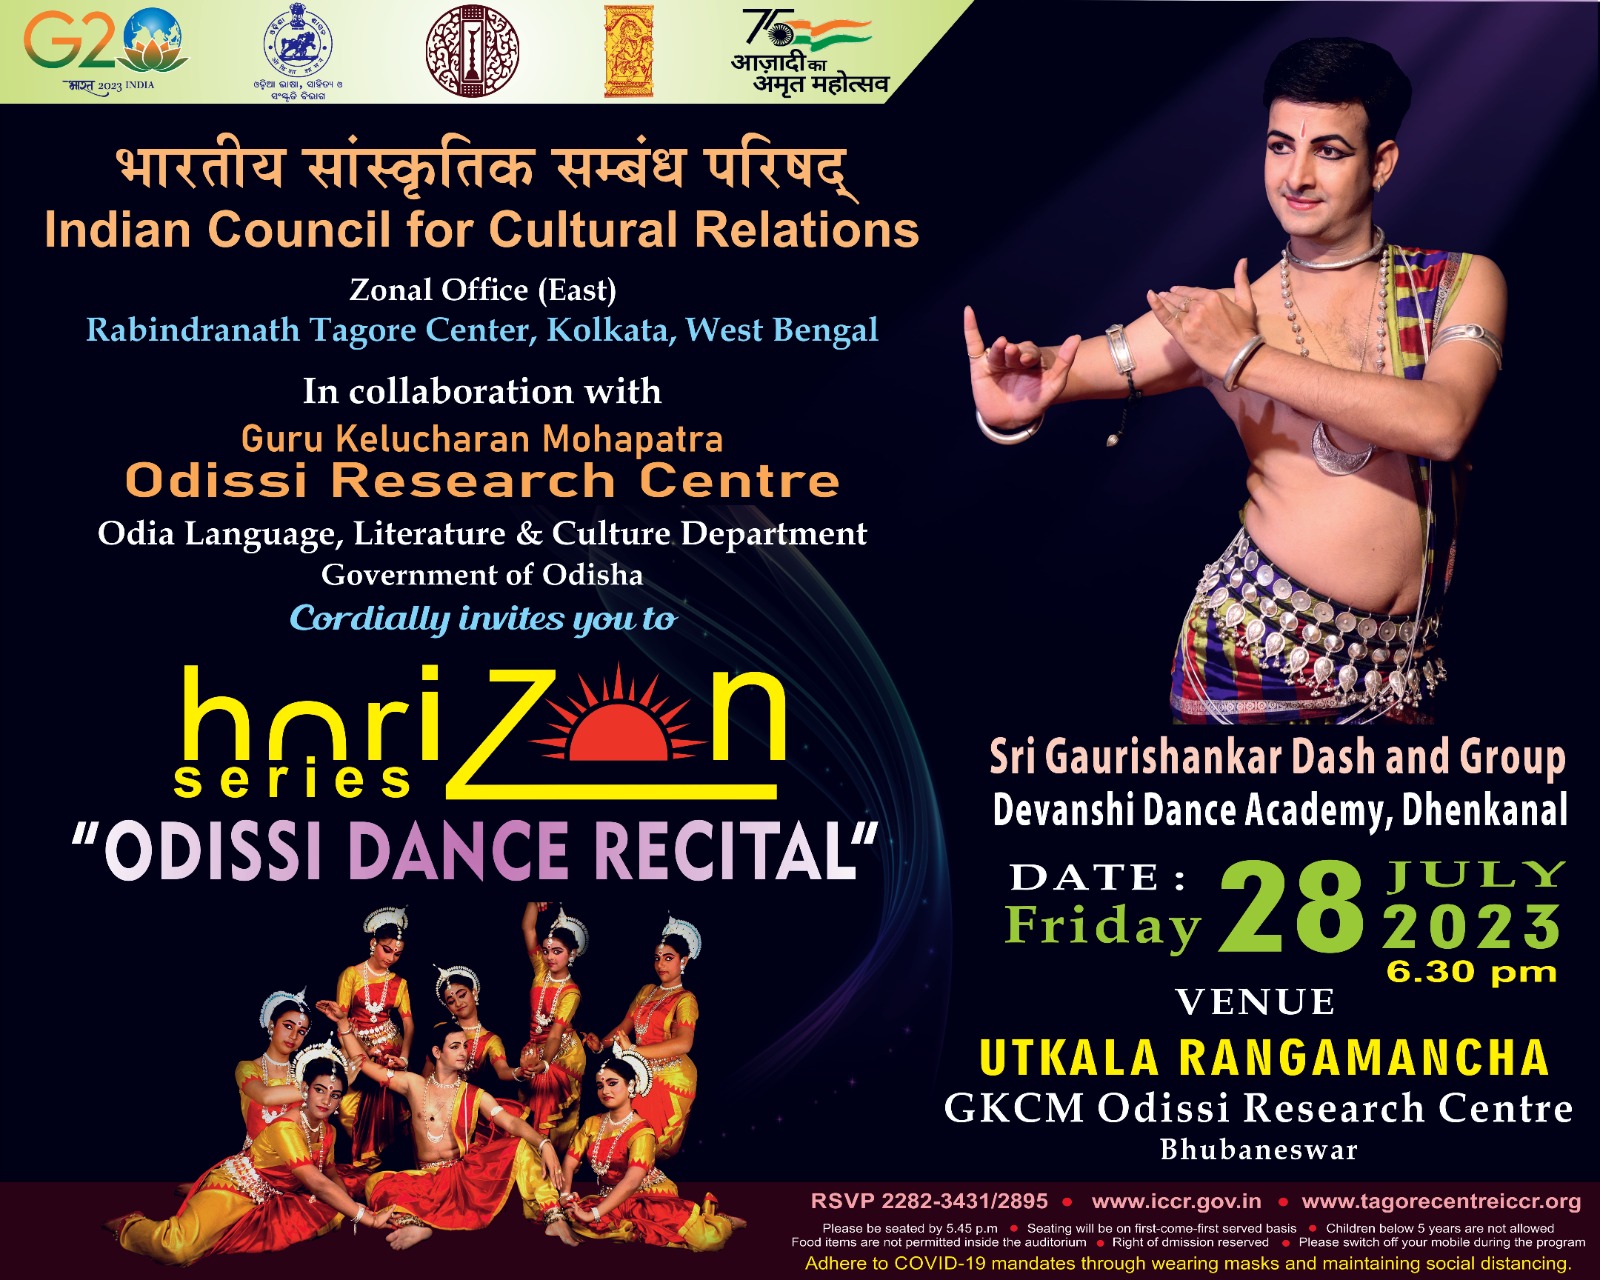 Indian Council for Cultural Relations (ICCR), Zonal Office (East), Kolkata in association with Guru Kelucharan Mohapatra Odissi Research Centre, Odia Language, Literature & Culture Department, Govt. of Odisha cordially invites you to Horizon Series programme “ODISSI DANCE RECITAL” by Sri Gaurishankar Dash and group Devanshi Dance Academy, Dhenkanal on Friday, 28th July, 2023 at 6:30 pm. at Utkala Rangamancha, GKCM Odissi Research Centre, Bhubaneswar.